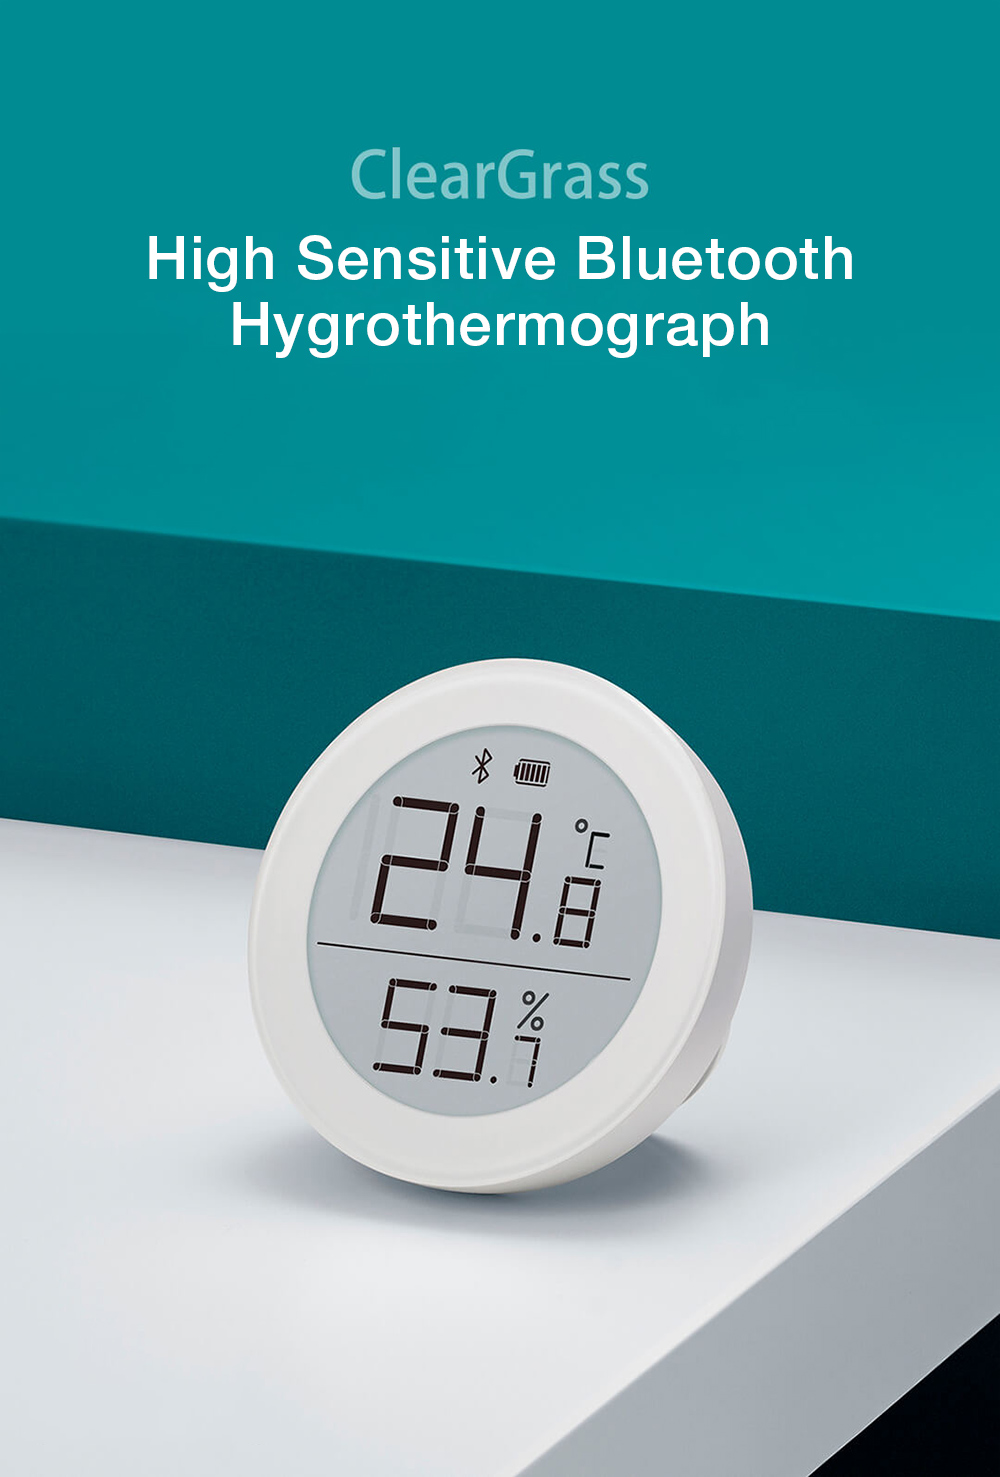 Clear Grass Bluetooth Hygrothermograph High Sensitive Hygrometer Thermometer